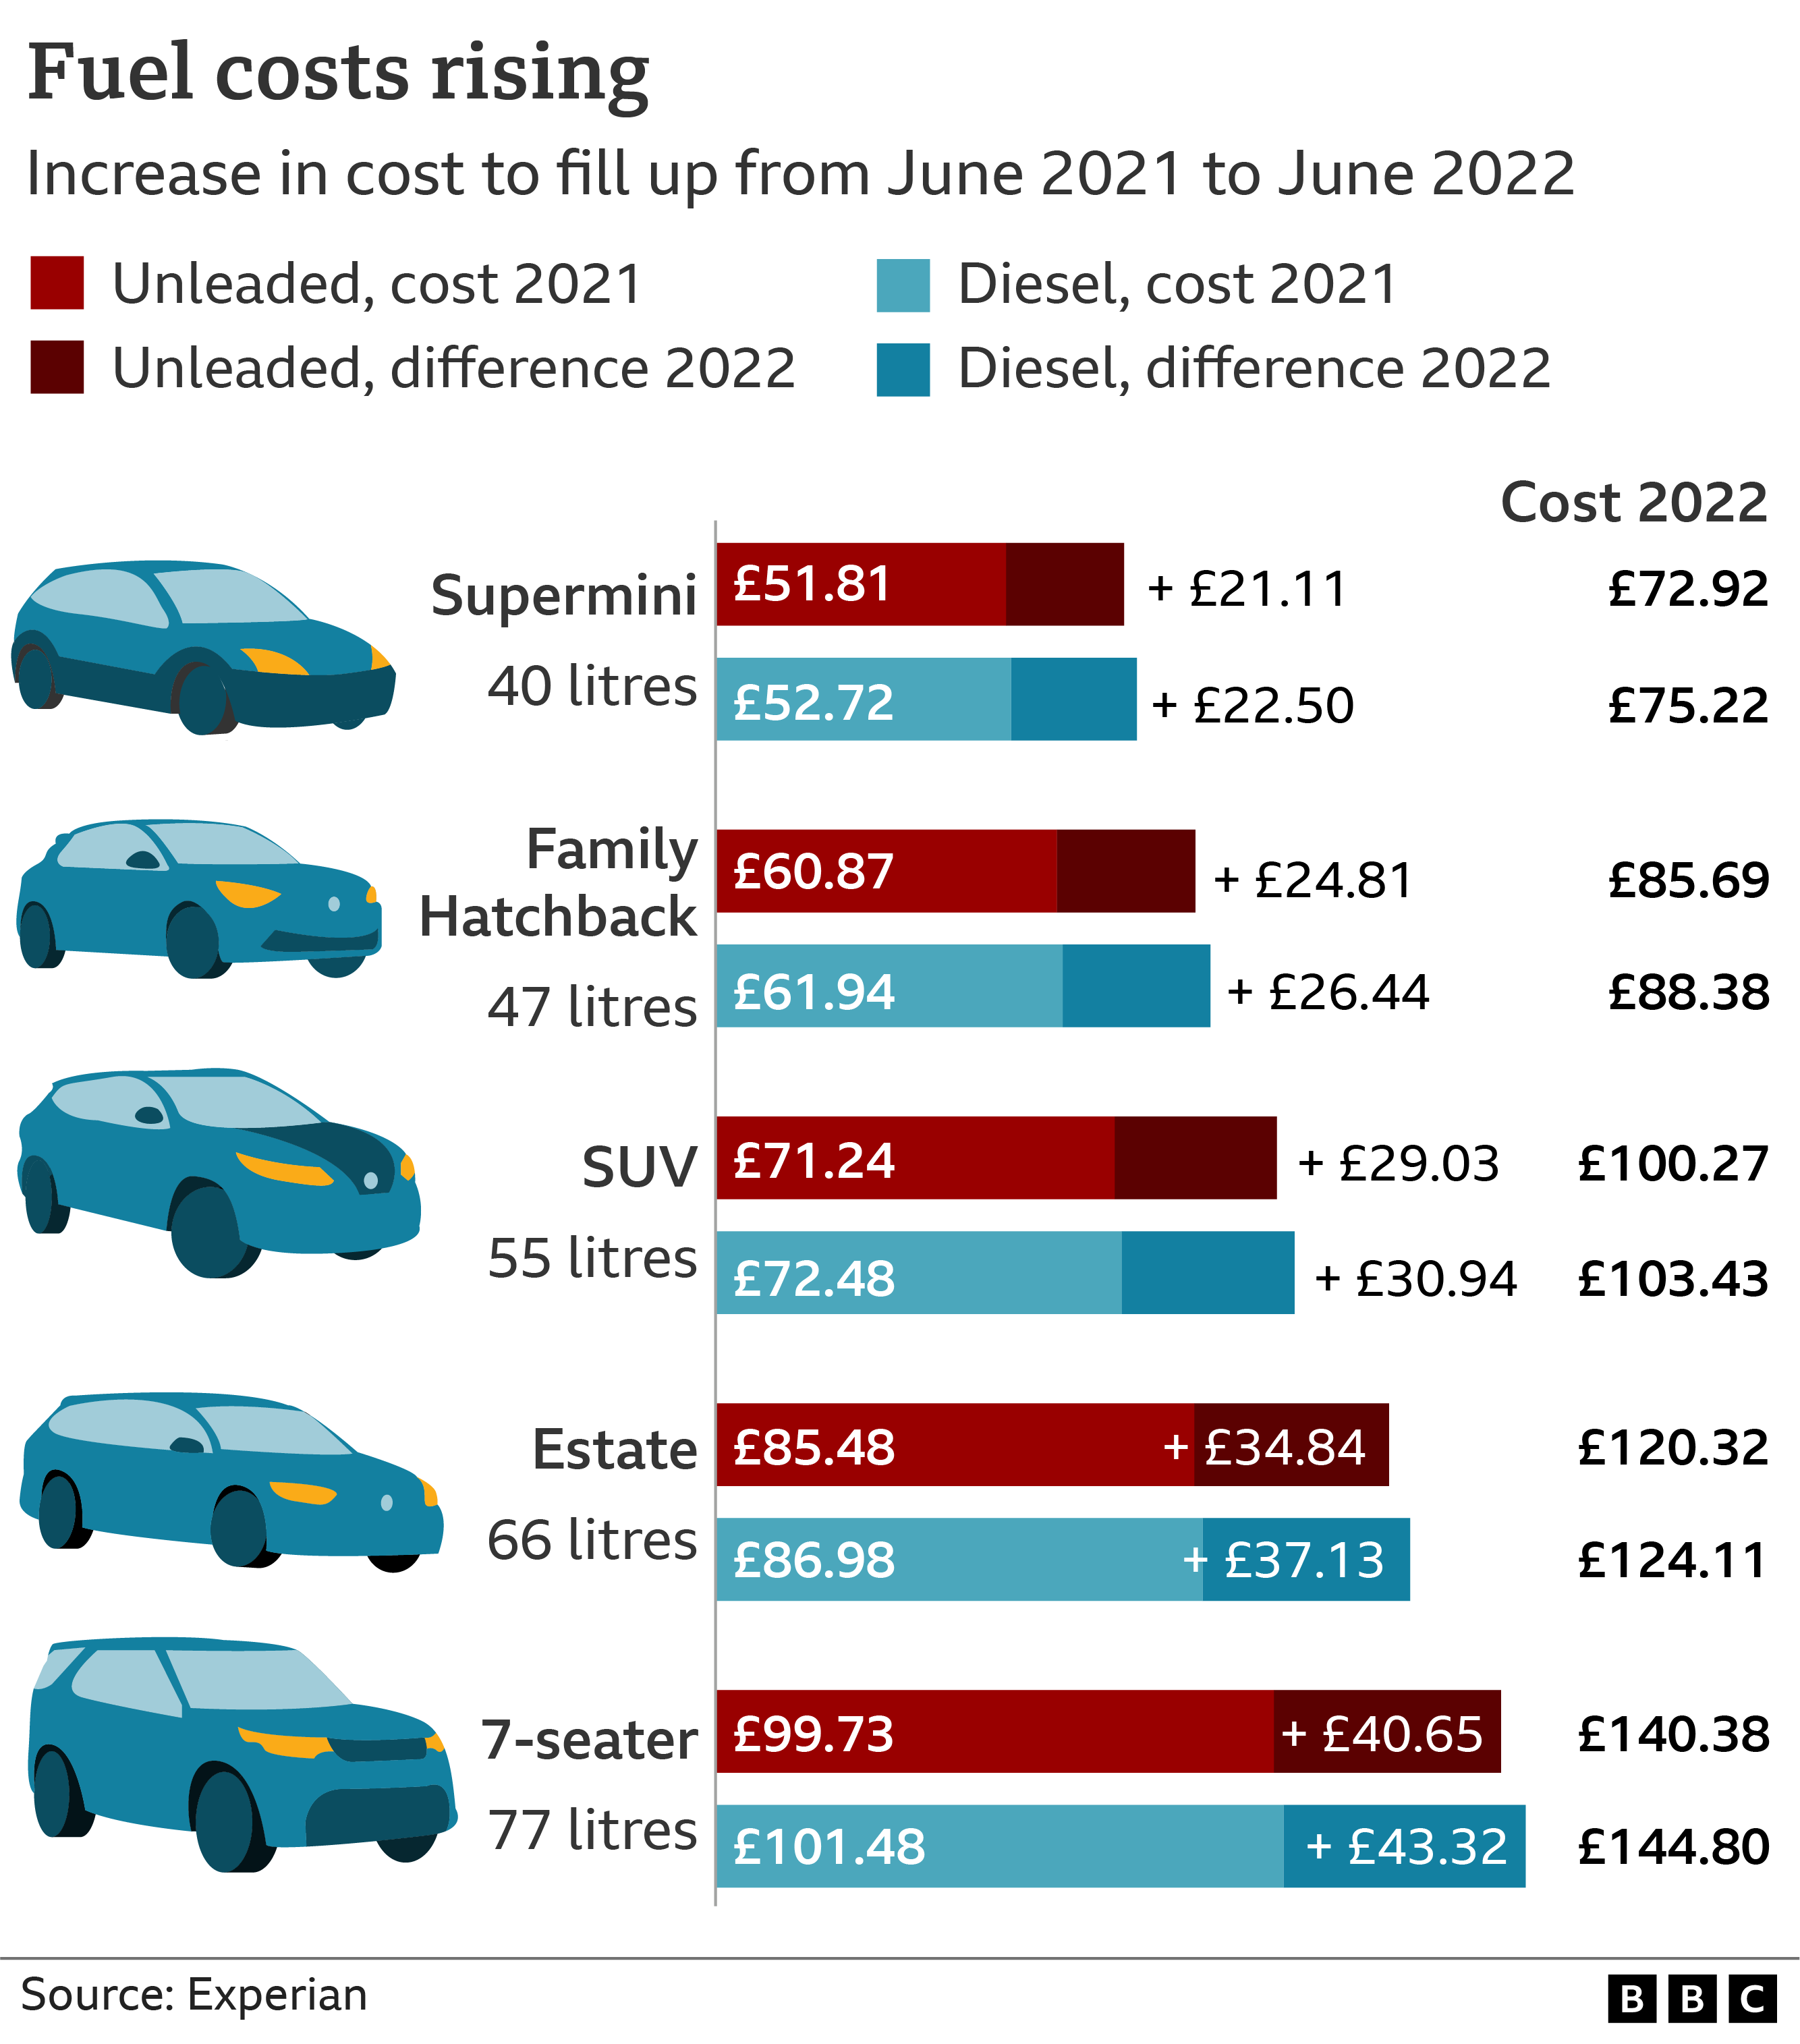 Graphic showing what it costs to fuel different types of cars